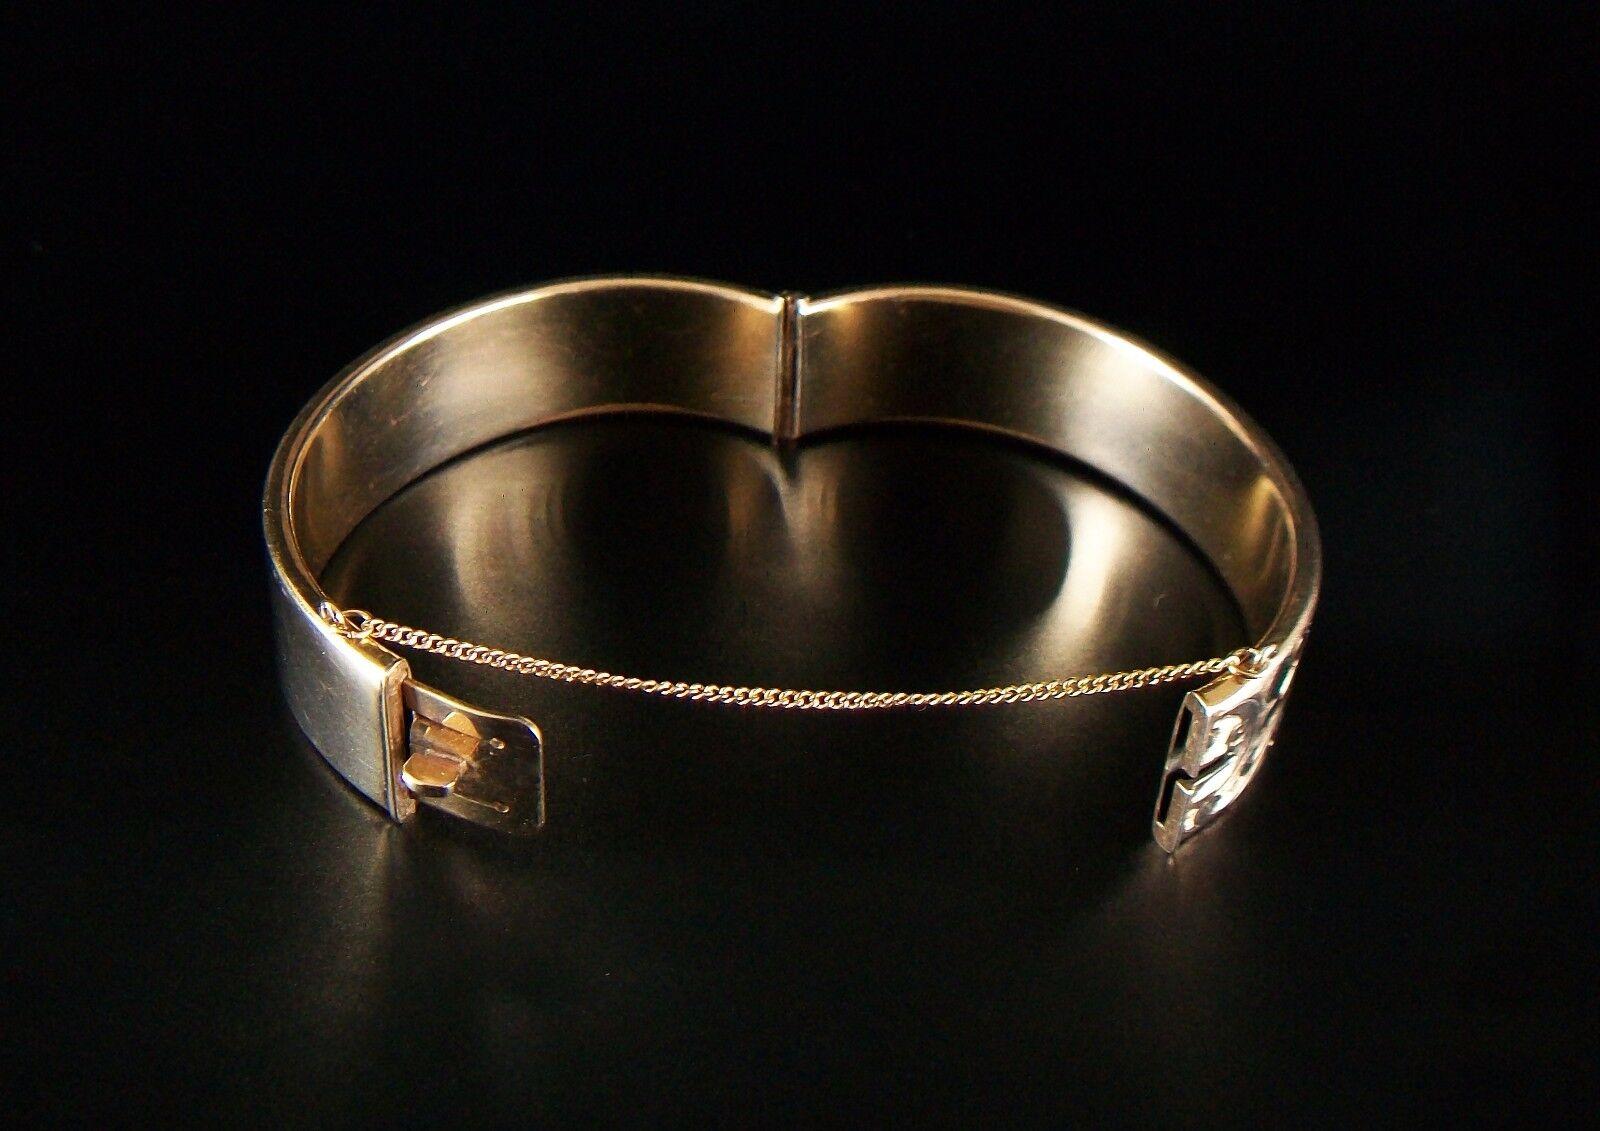 Payton Pepper Ltd, Antique 9k Rolled Gold Bangle Bracelet, U K, 20th Century In Good Condition For Sale In Chatham, CA